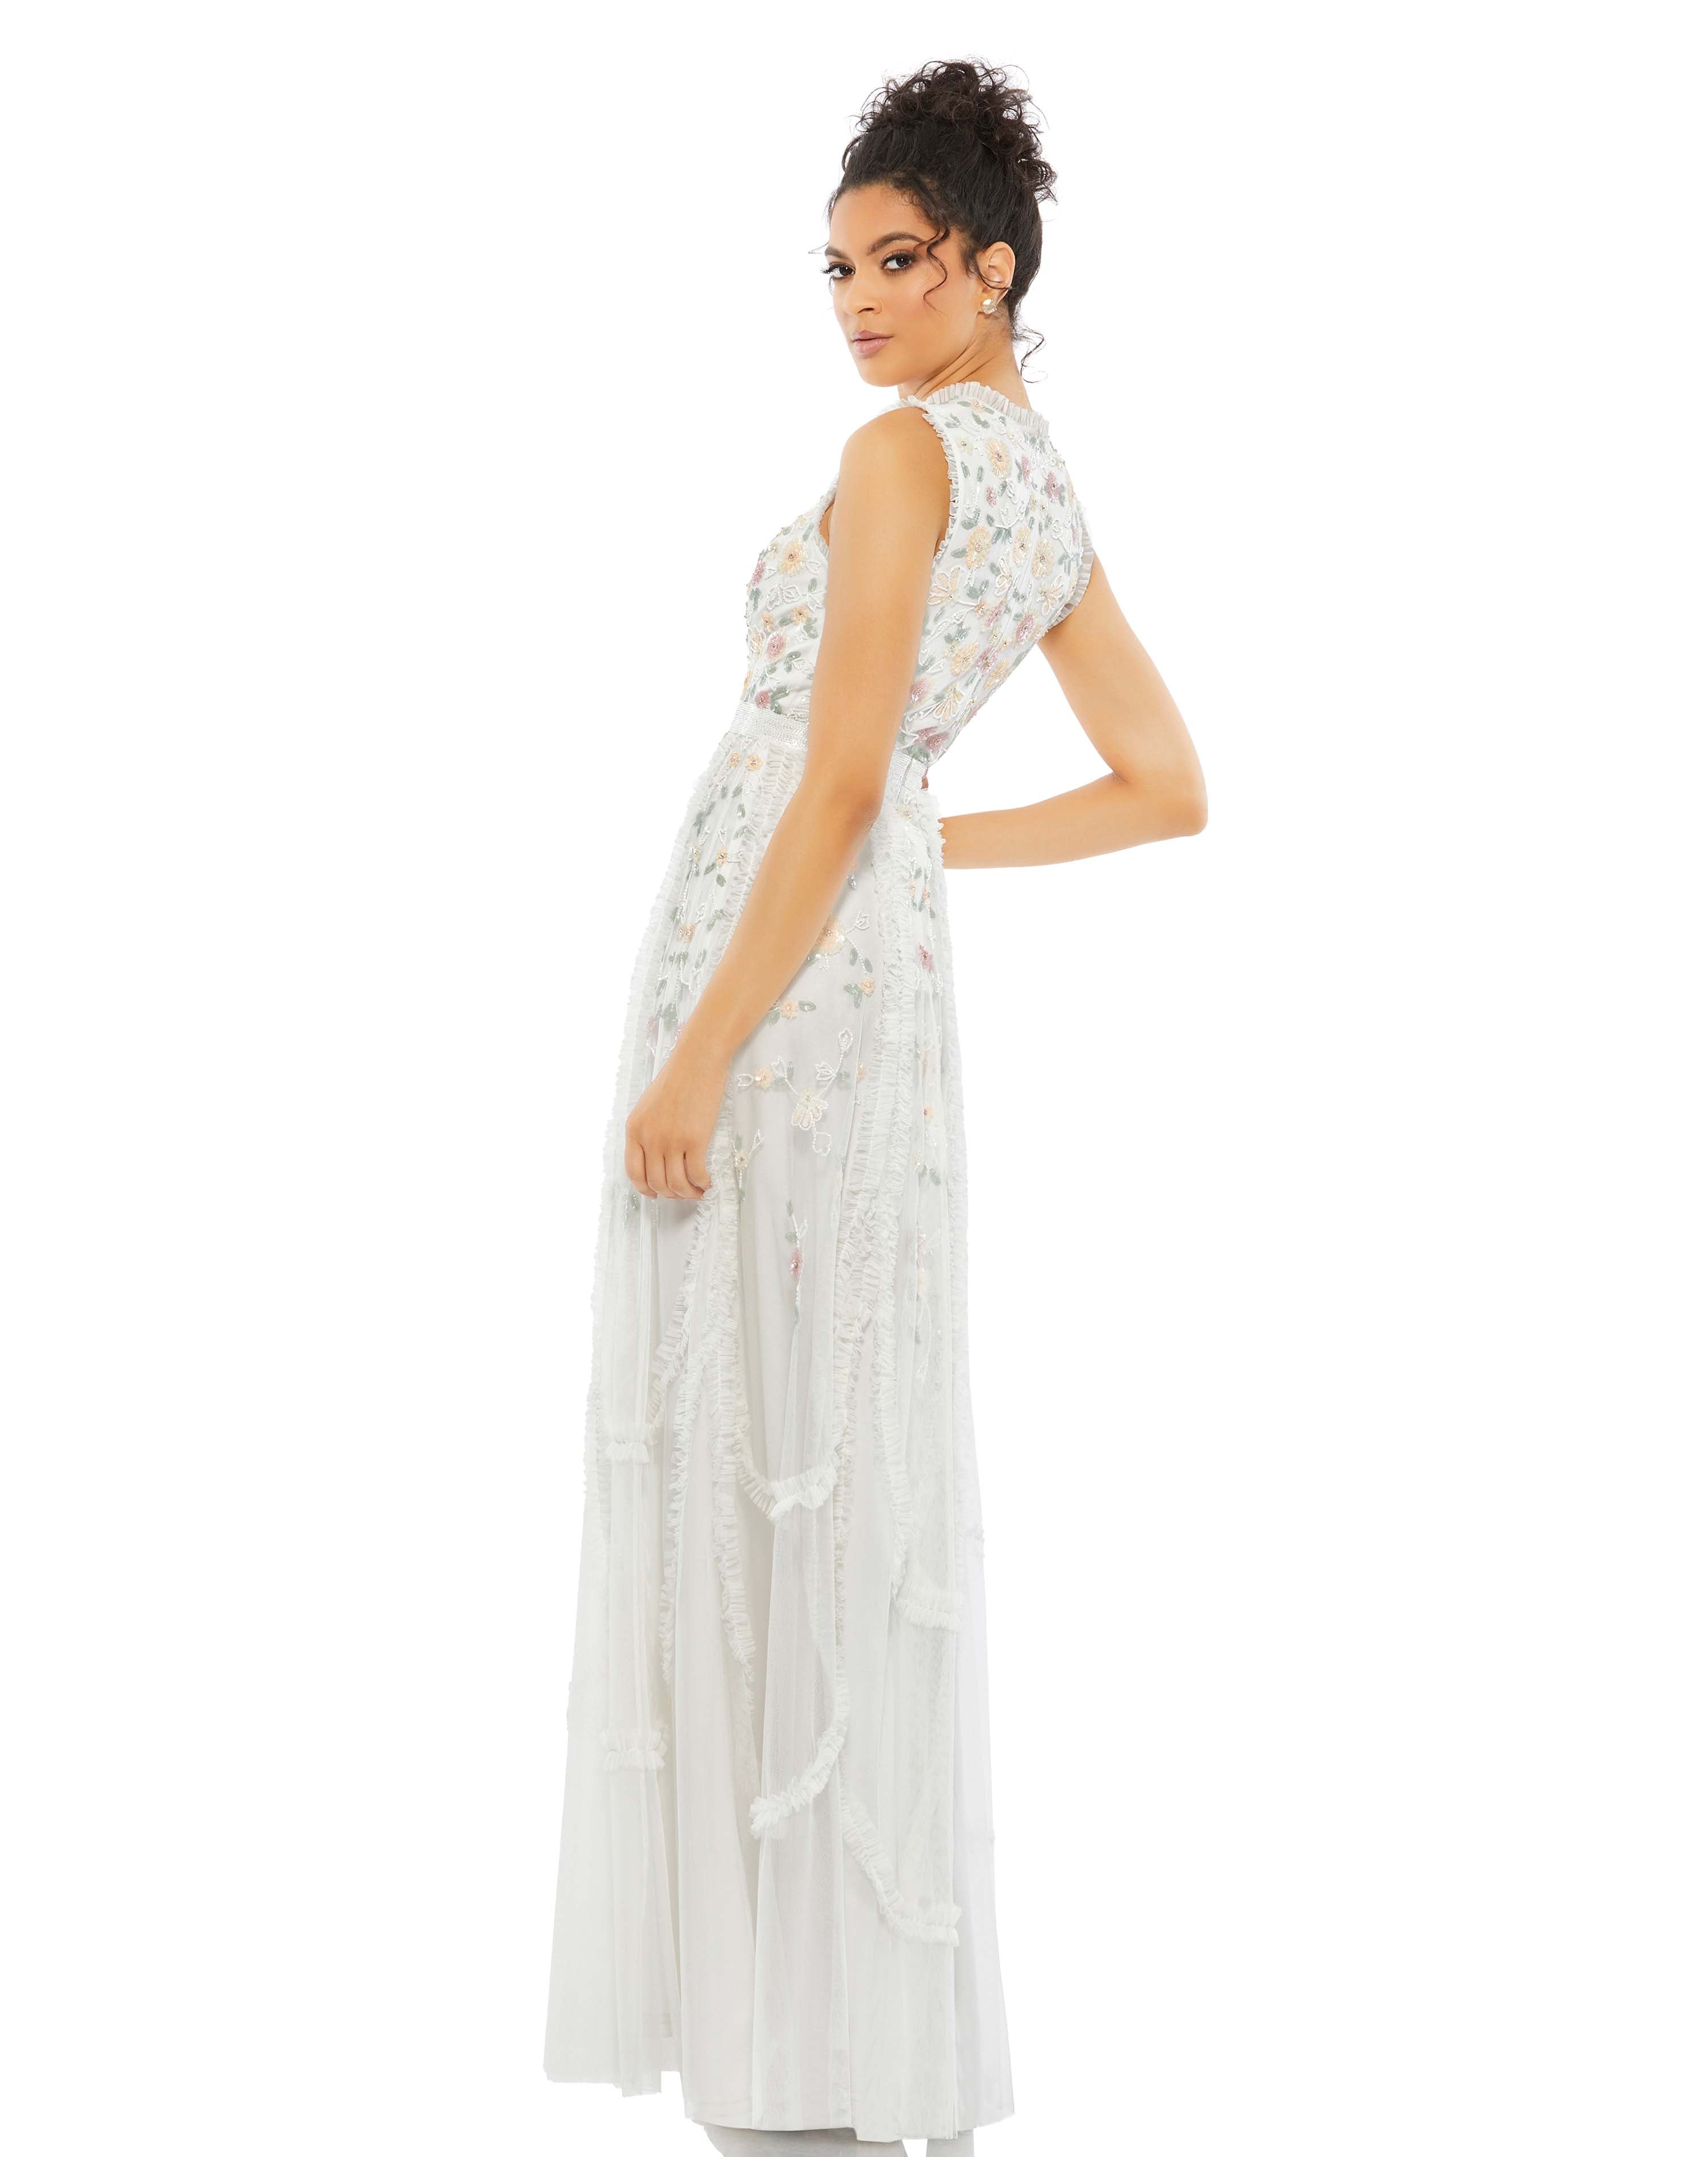 Embroidered High Neck Sleeveless Ruffled Gown - FINAL SALE